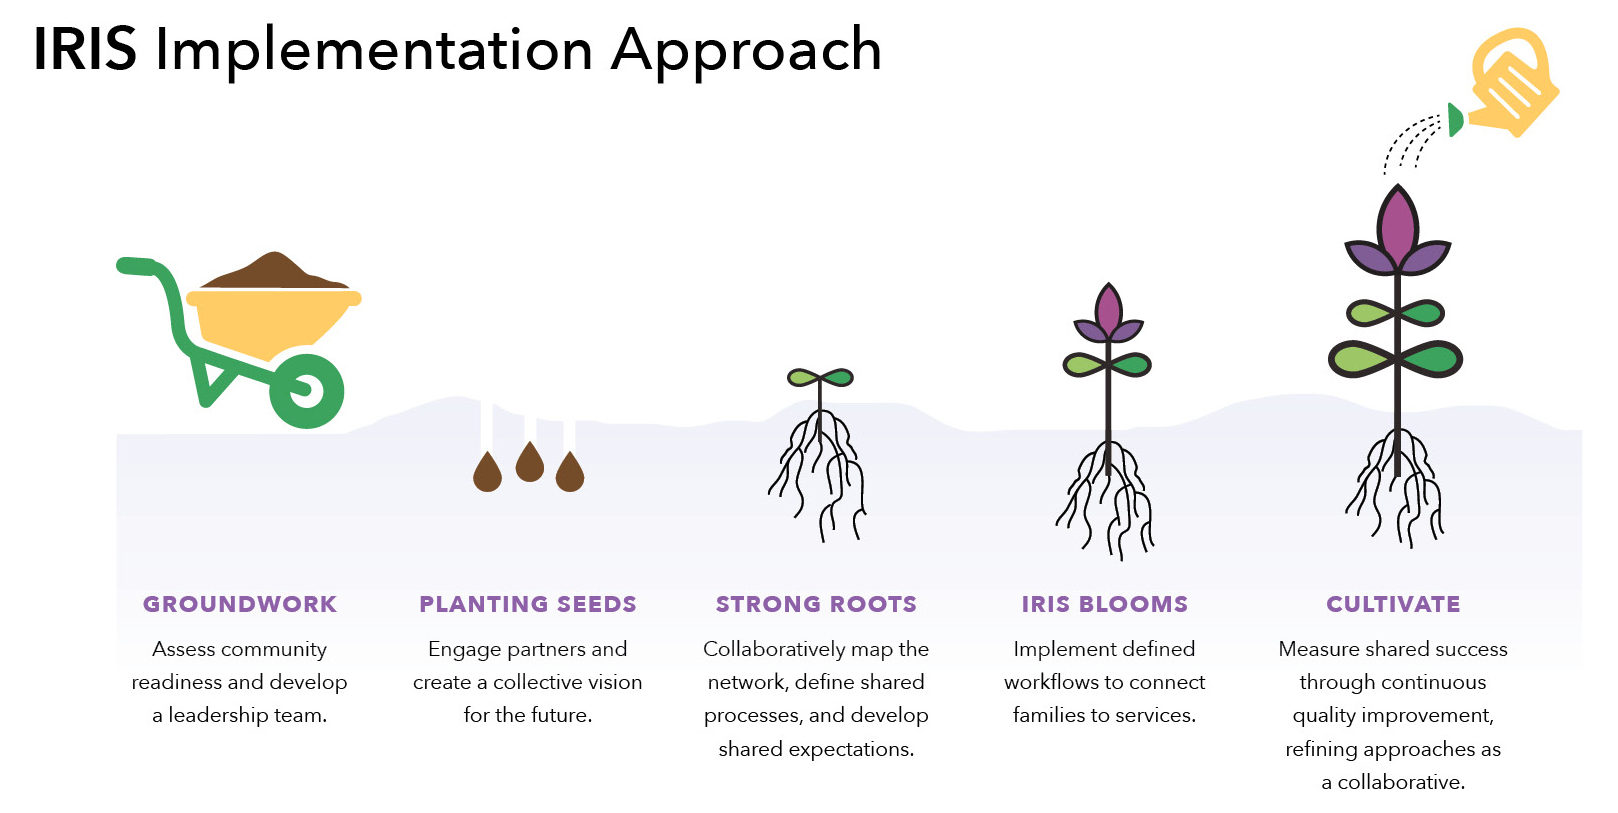 IRIS Implementation approach five phases garden